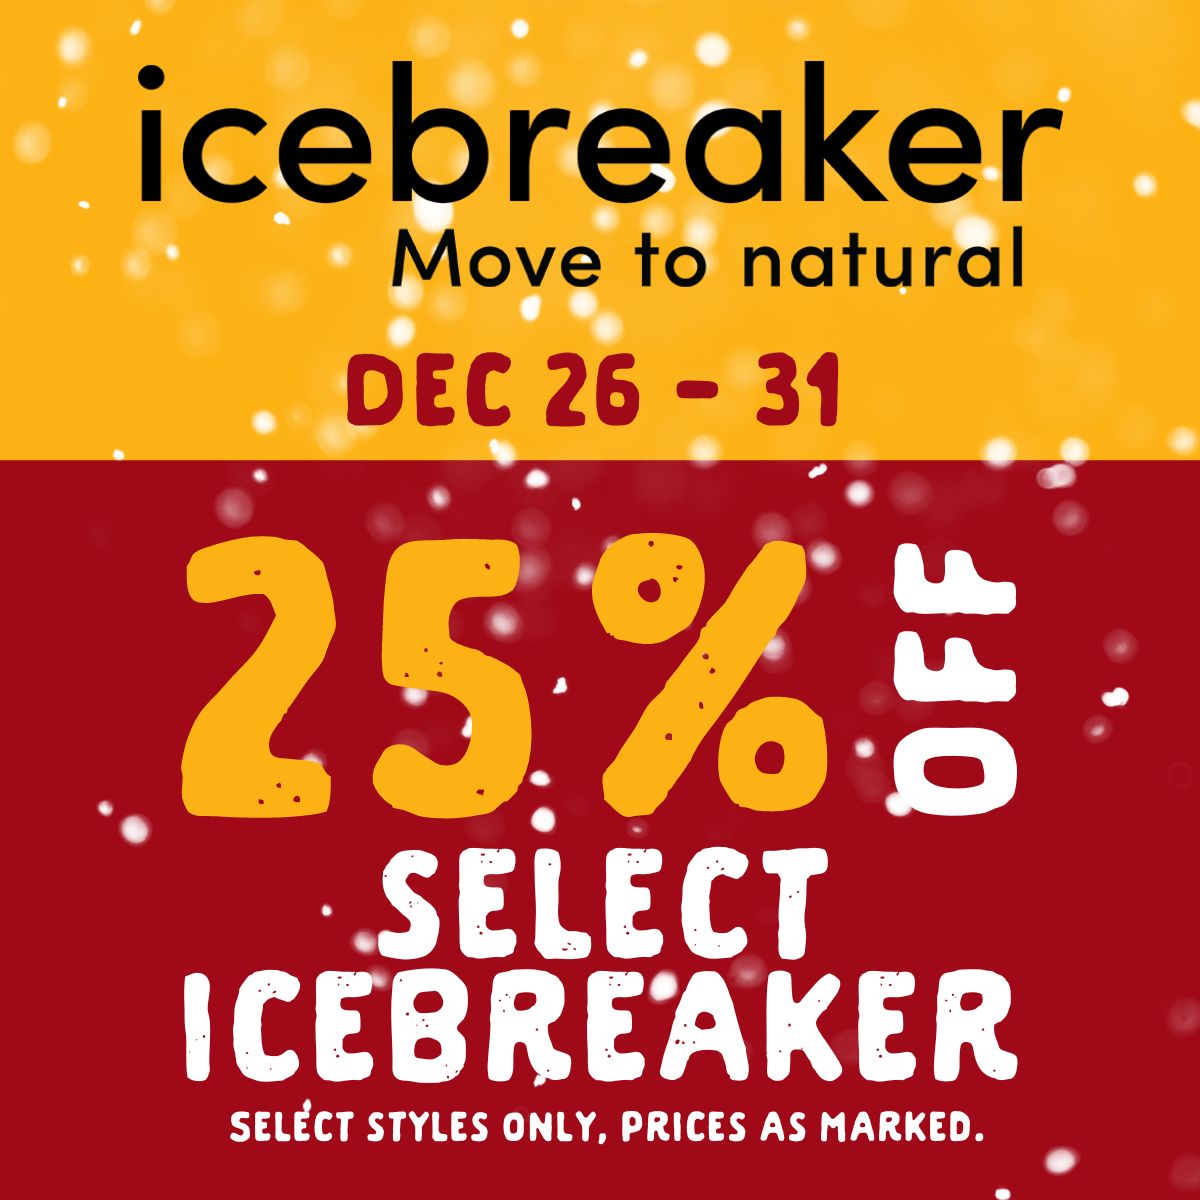 25% off select Icebreaker from December 26 to 31. Select styles only, prices as marked.